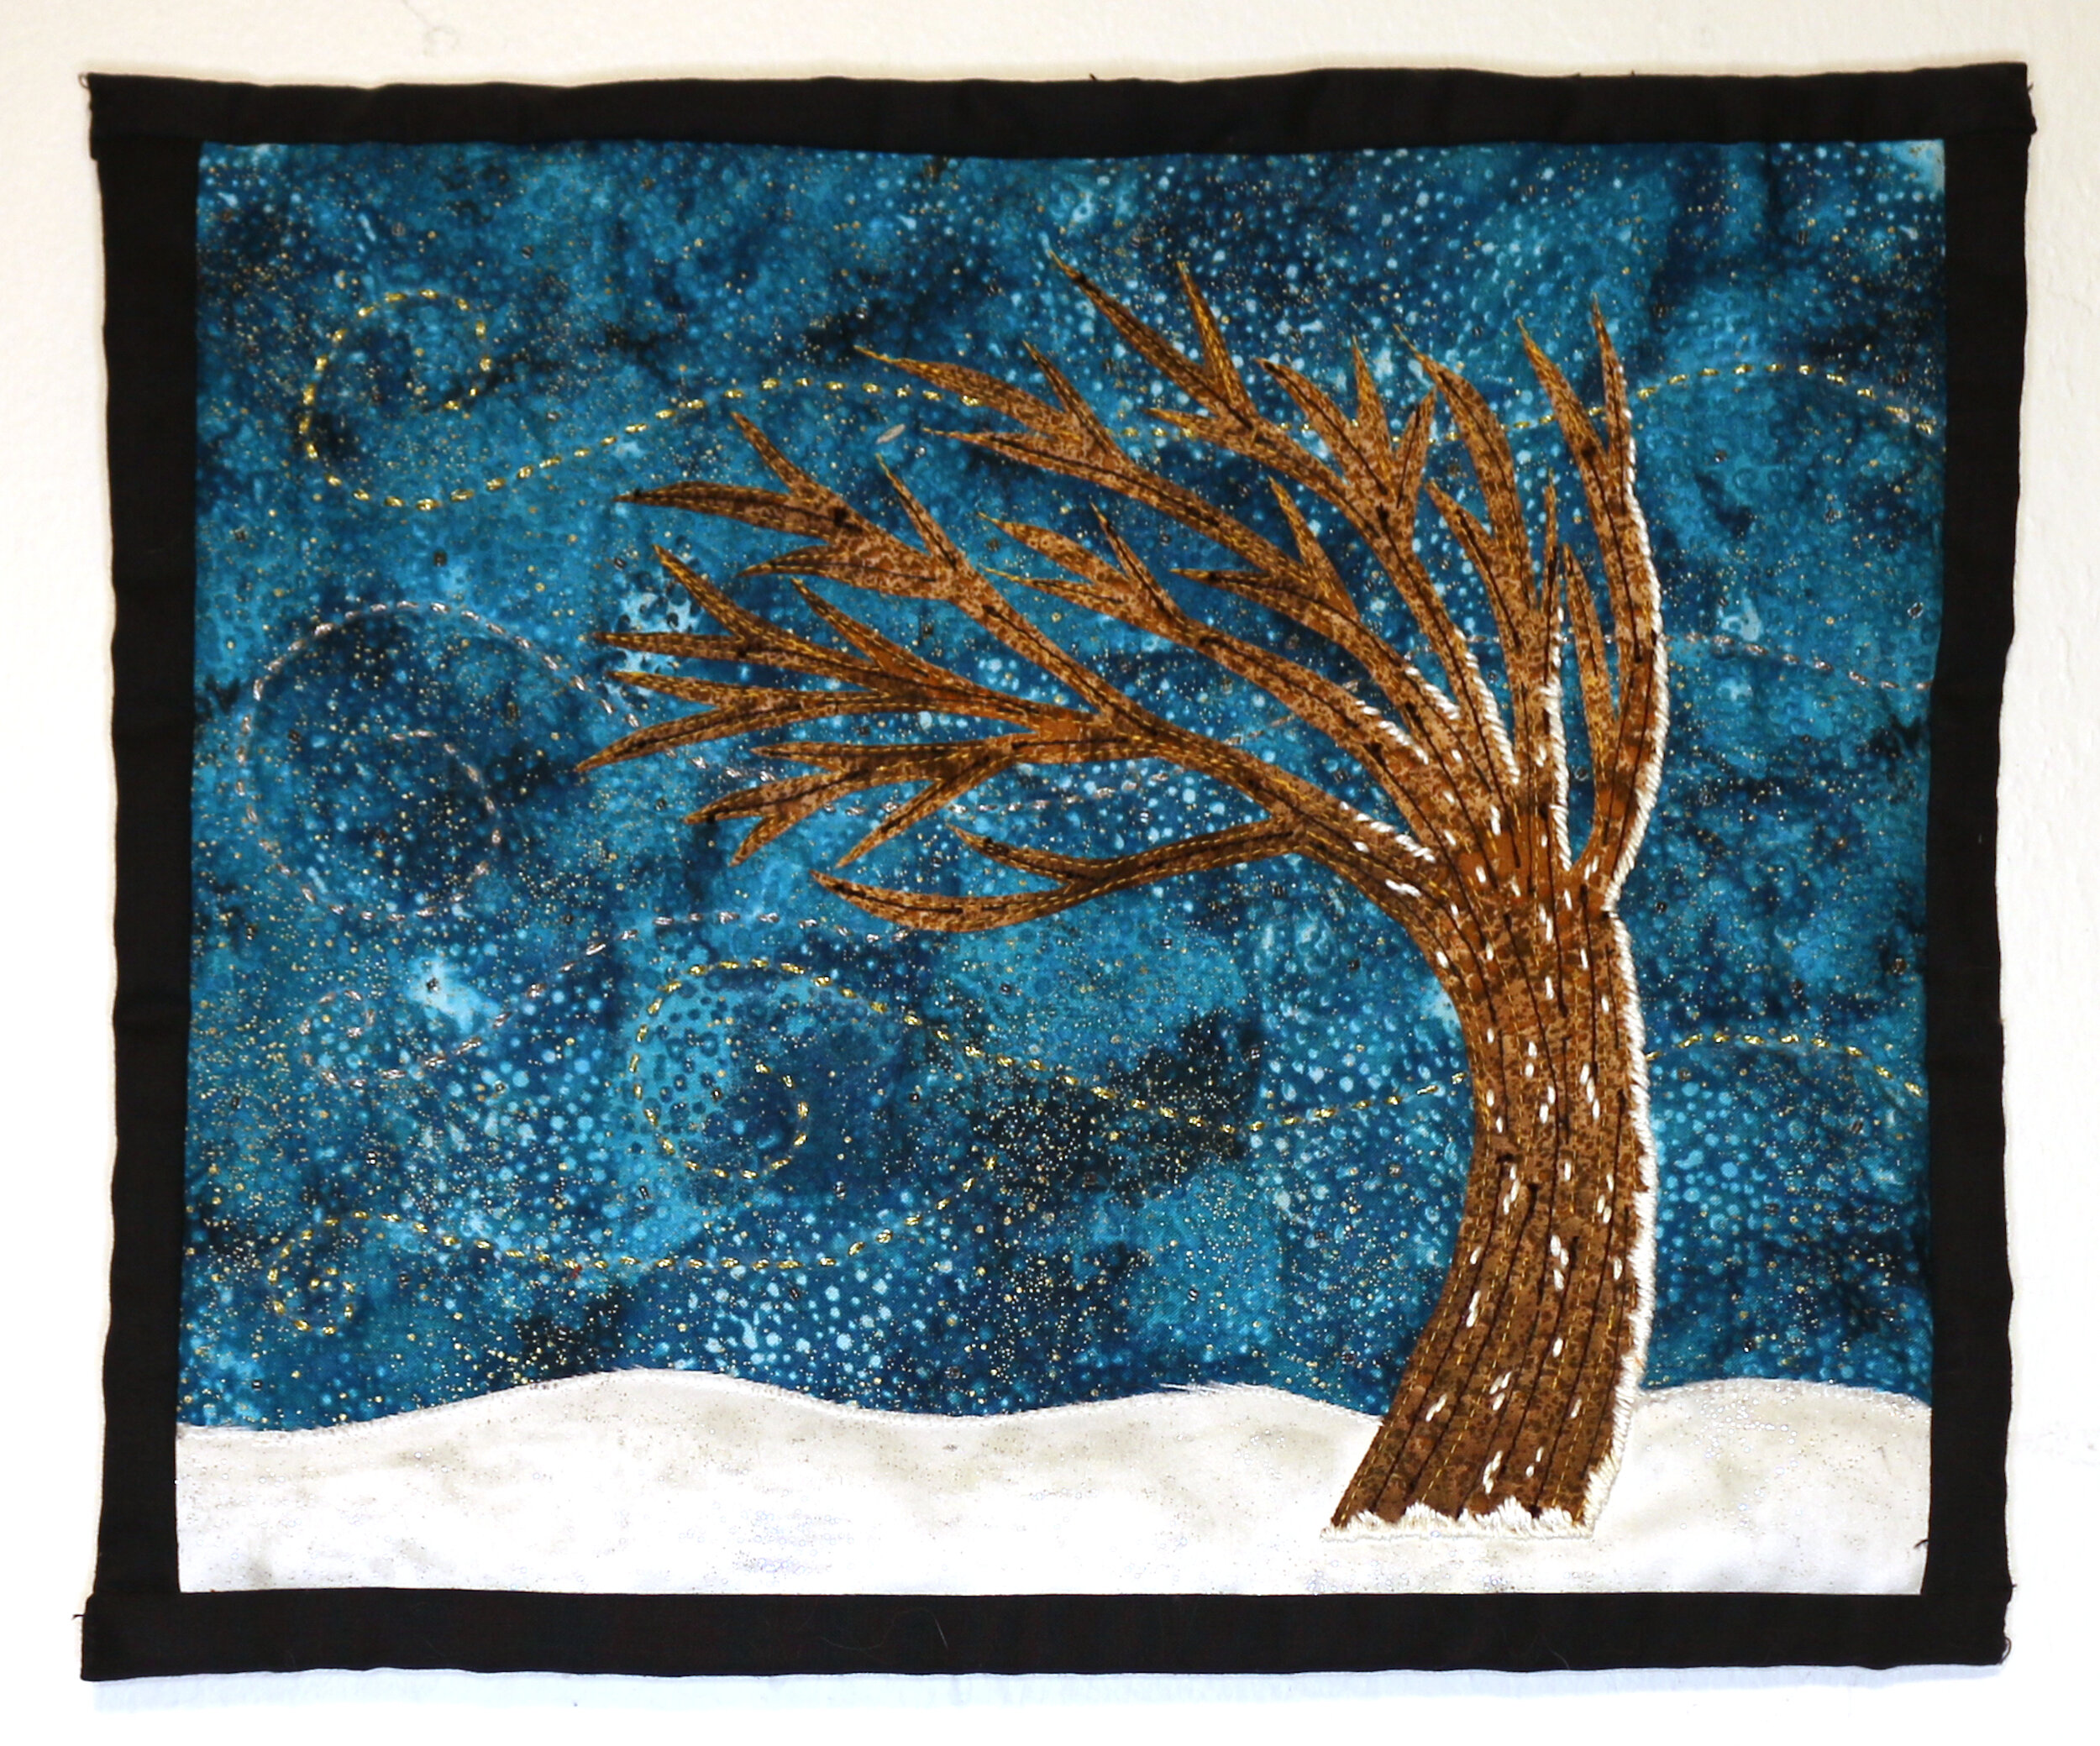  Winter Storm  Appliqué quilt with hand embroidery, beading, machine sewing 